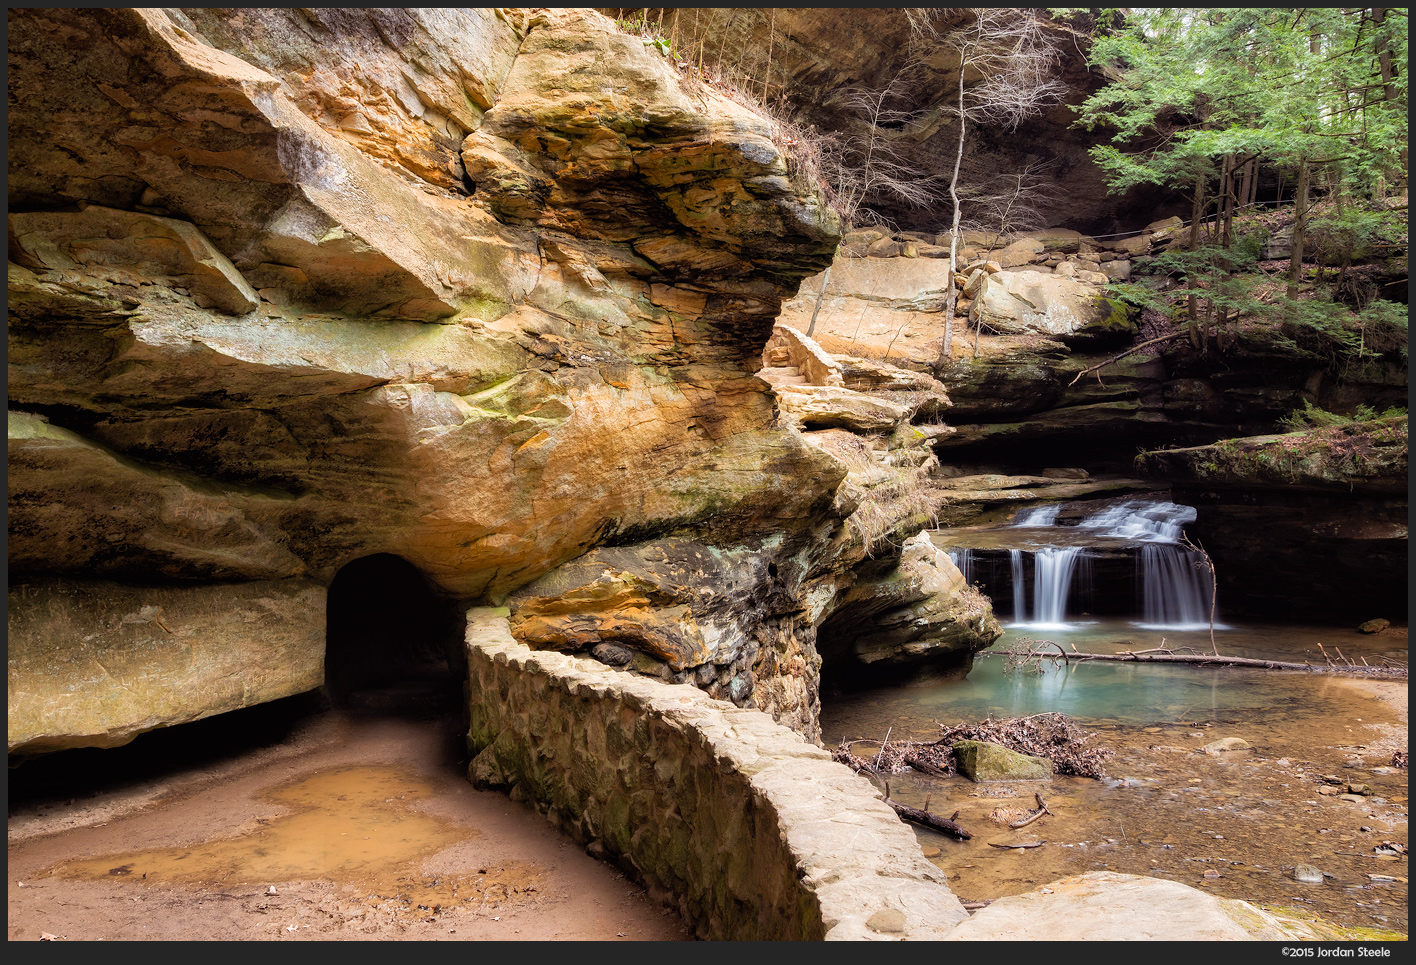 Cave and Falls - Panasonic GX8 with